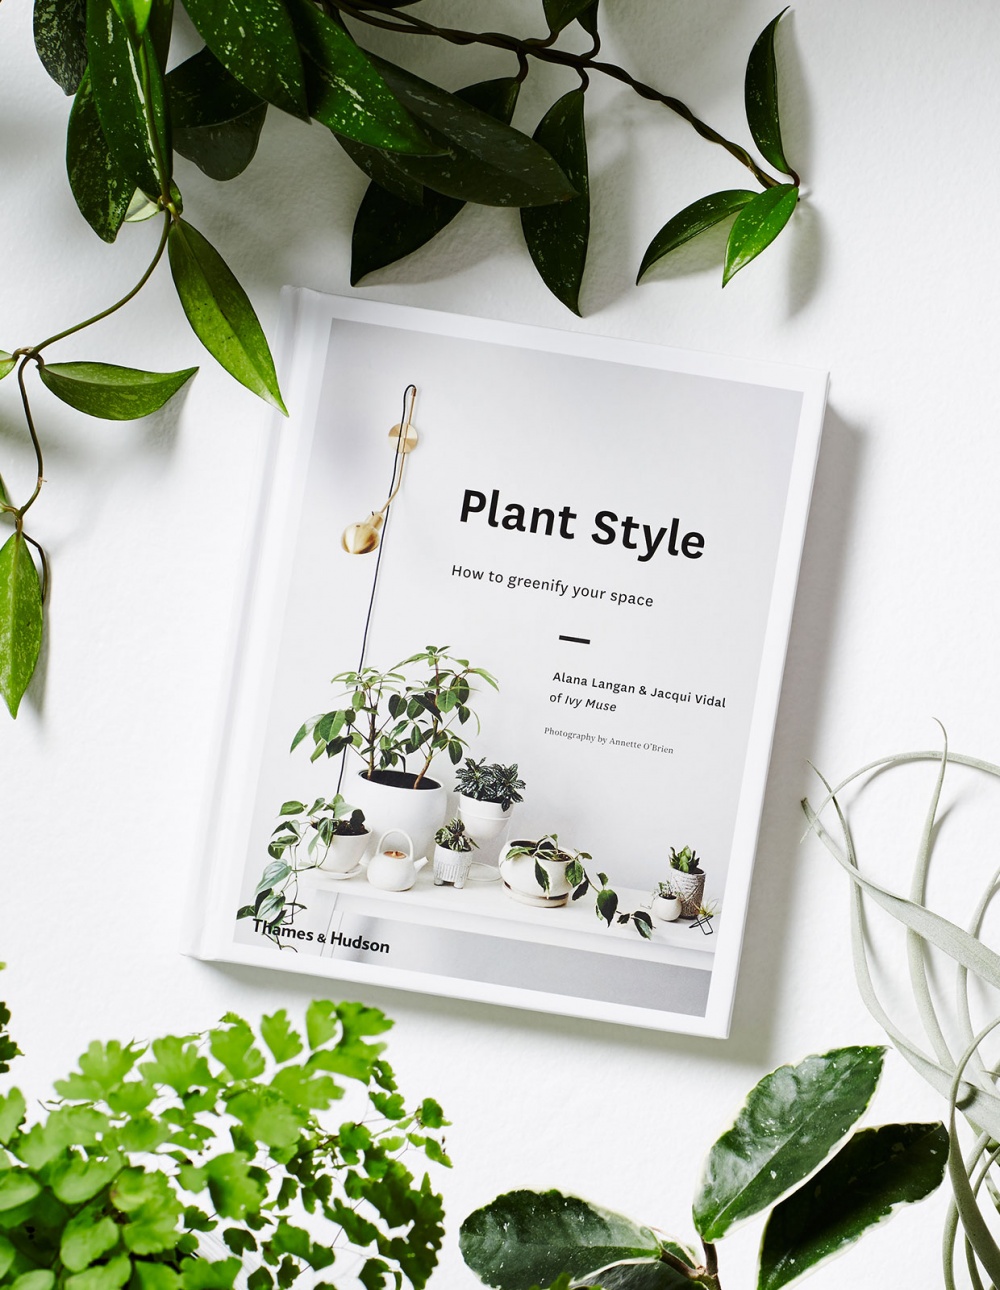 Plant Style: How to greenify your space by Alana Langan and Jacqui Vidal